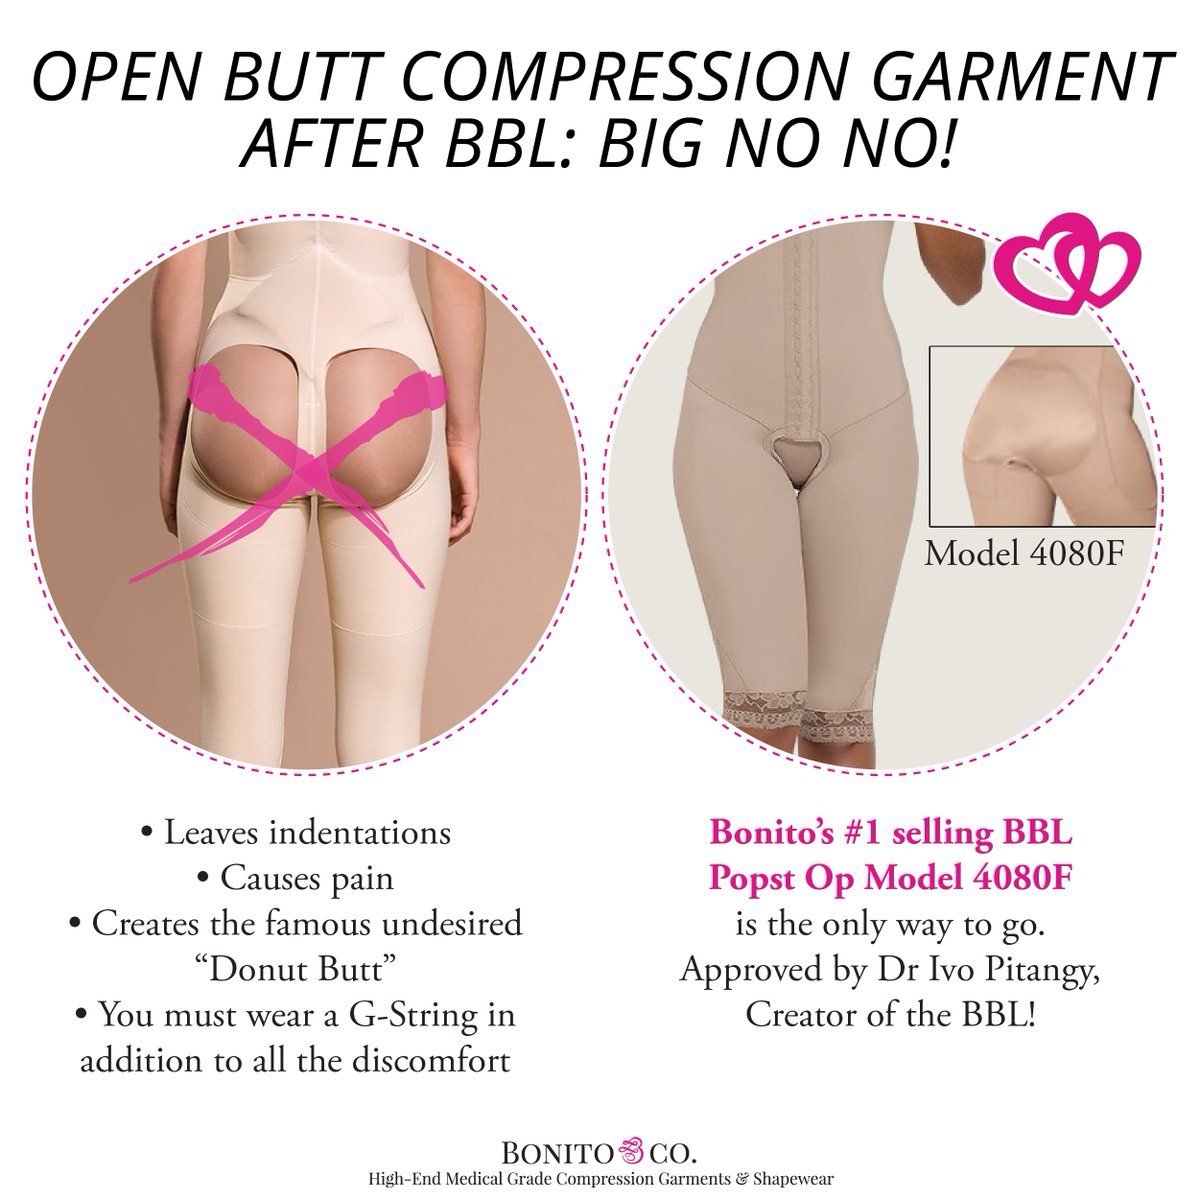 Bonito & Co. on X: Open butt Compression Garment after BBL. Big